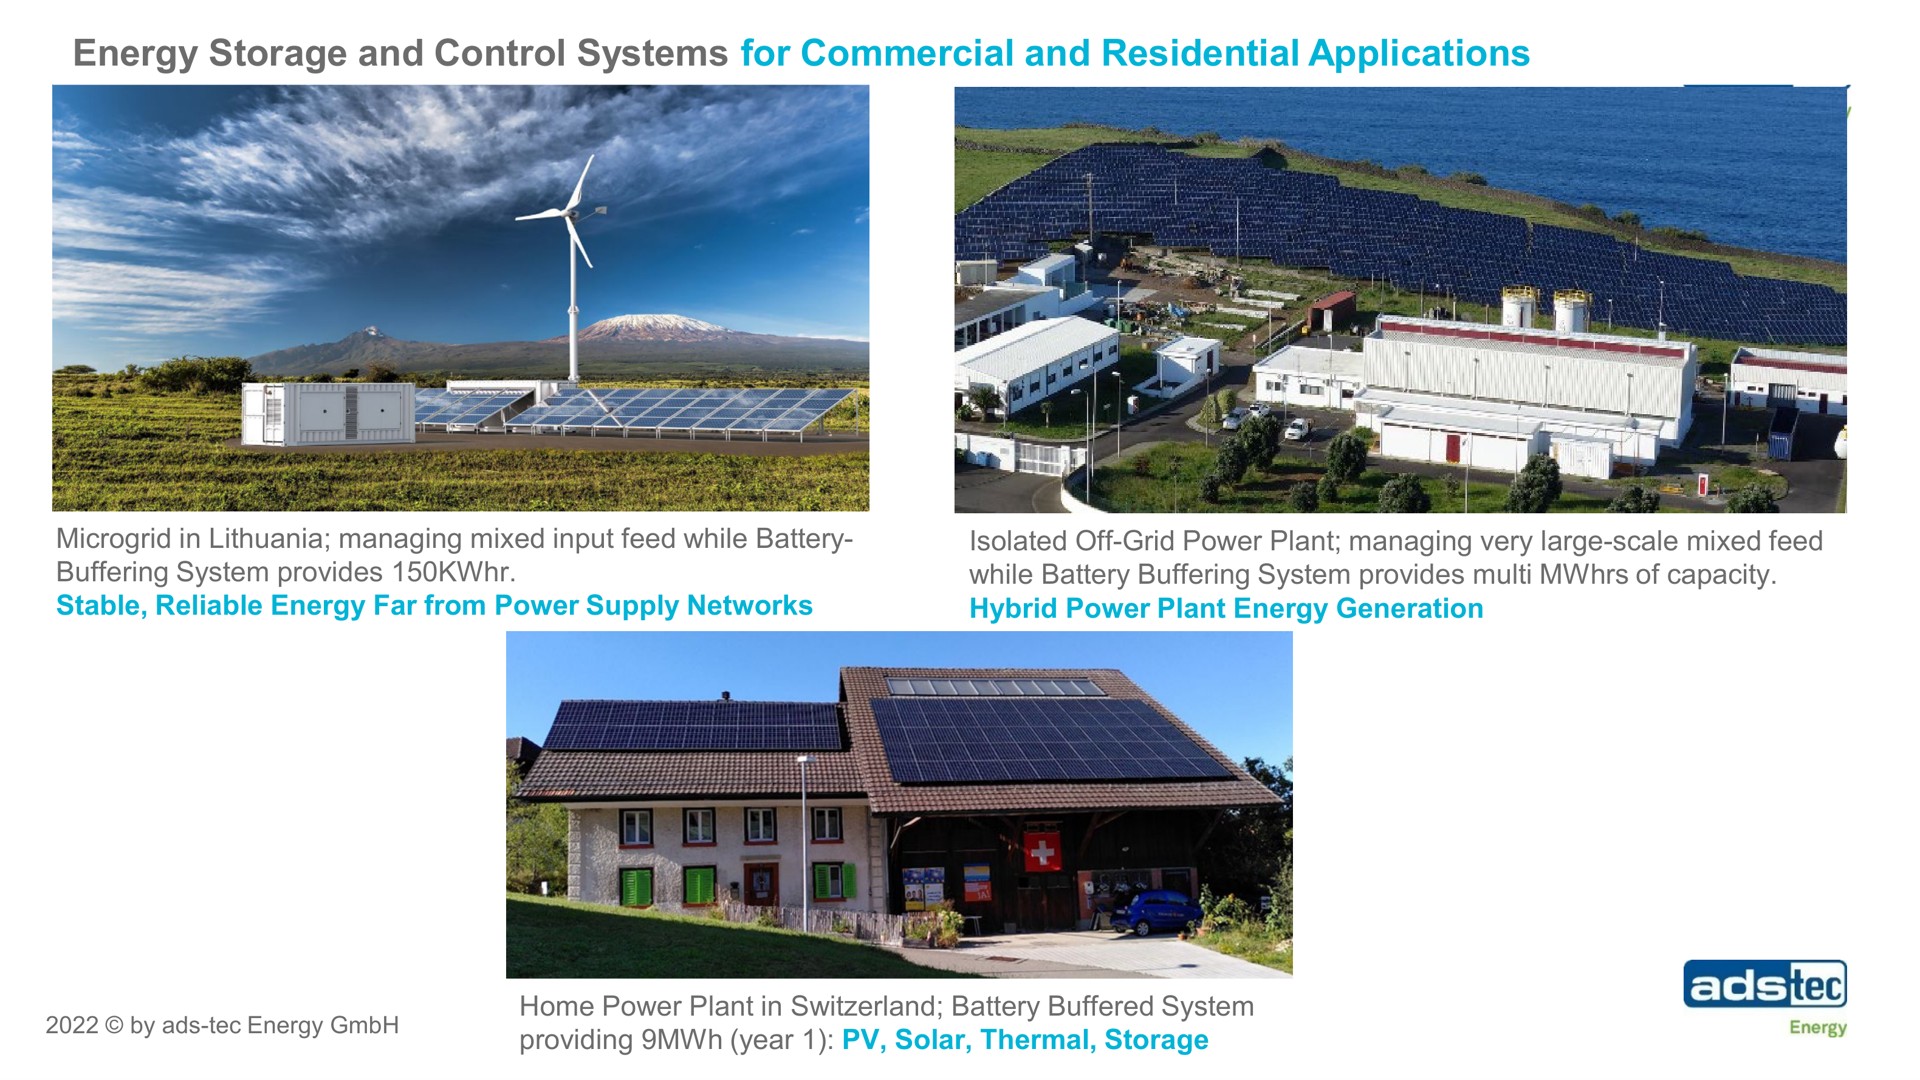 energy storage and control systems for commercial and residential applications ads tec energy by providing year solar thermal nine | ads-tec Energy